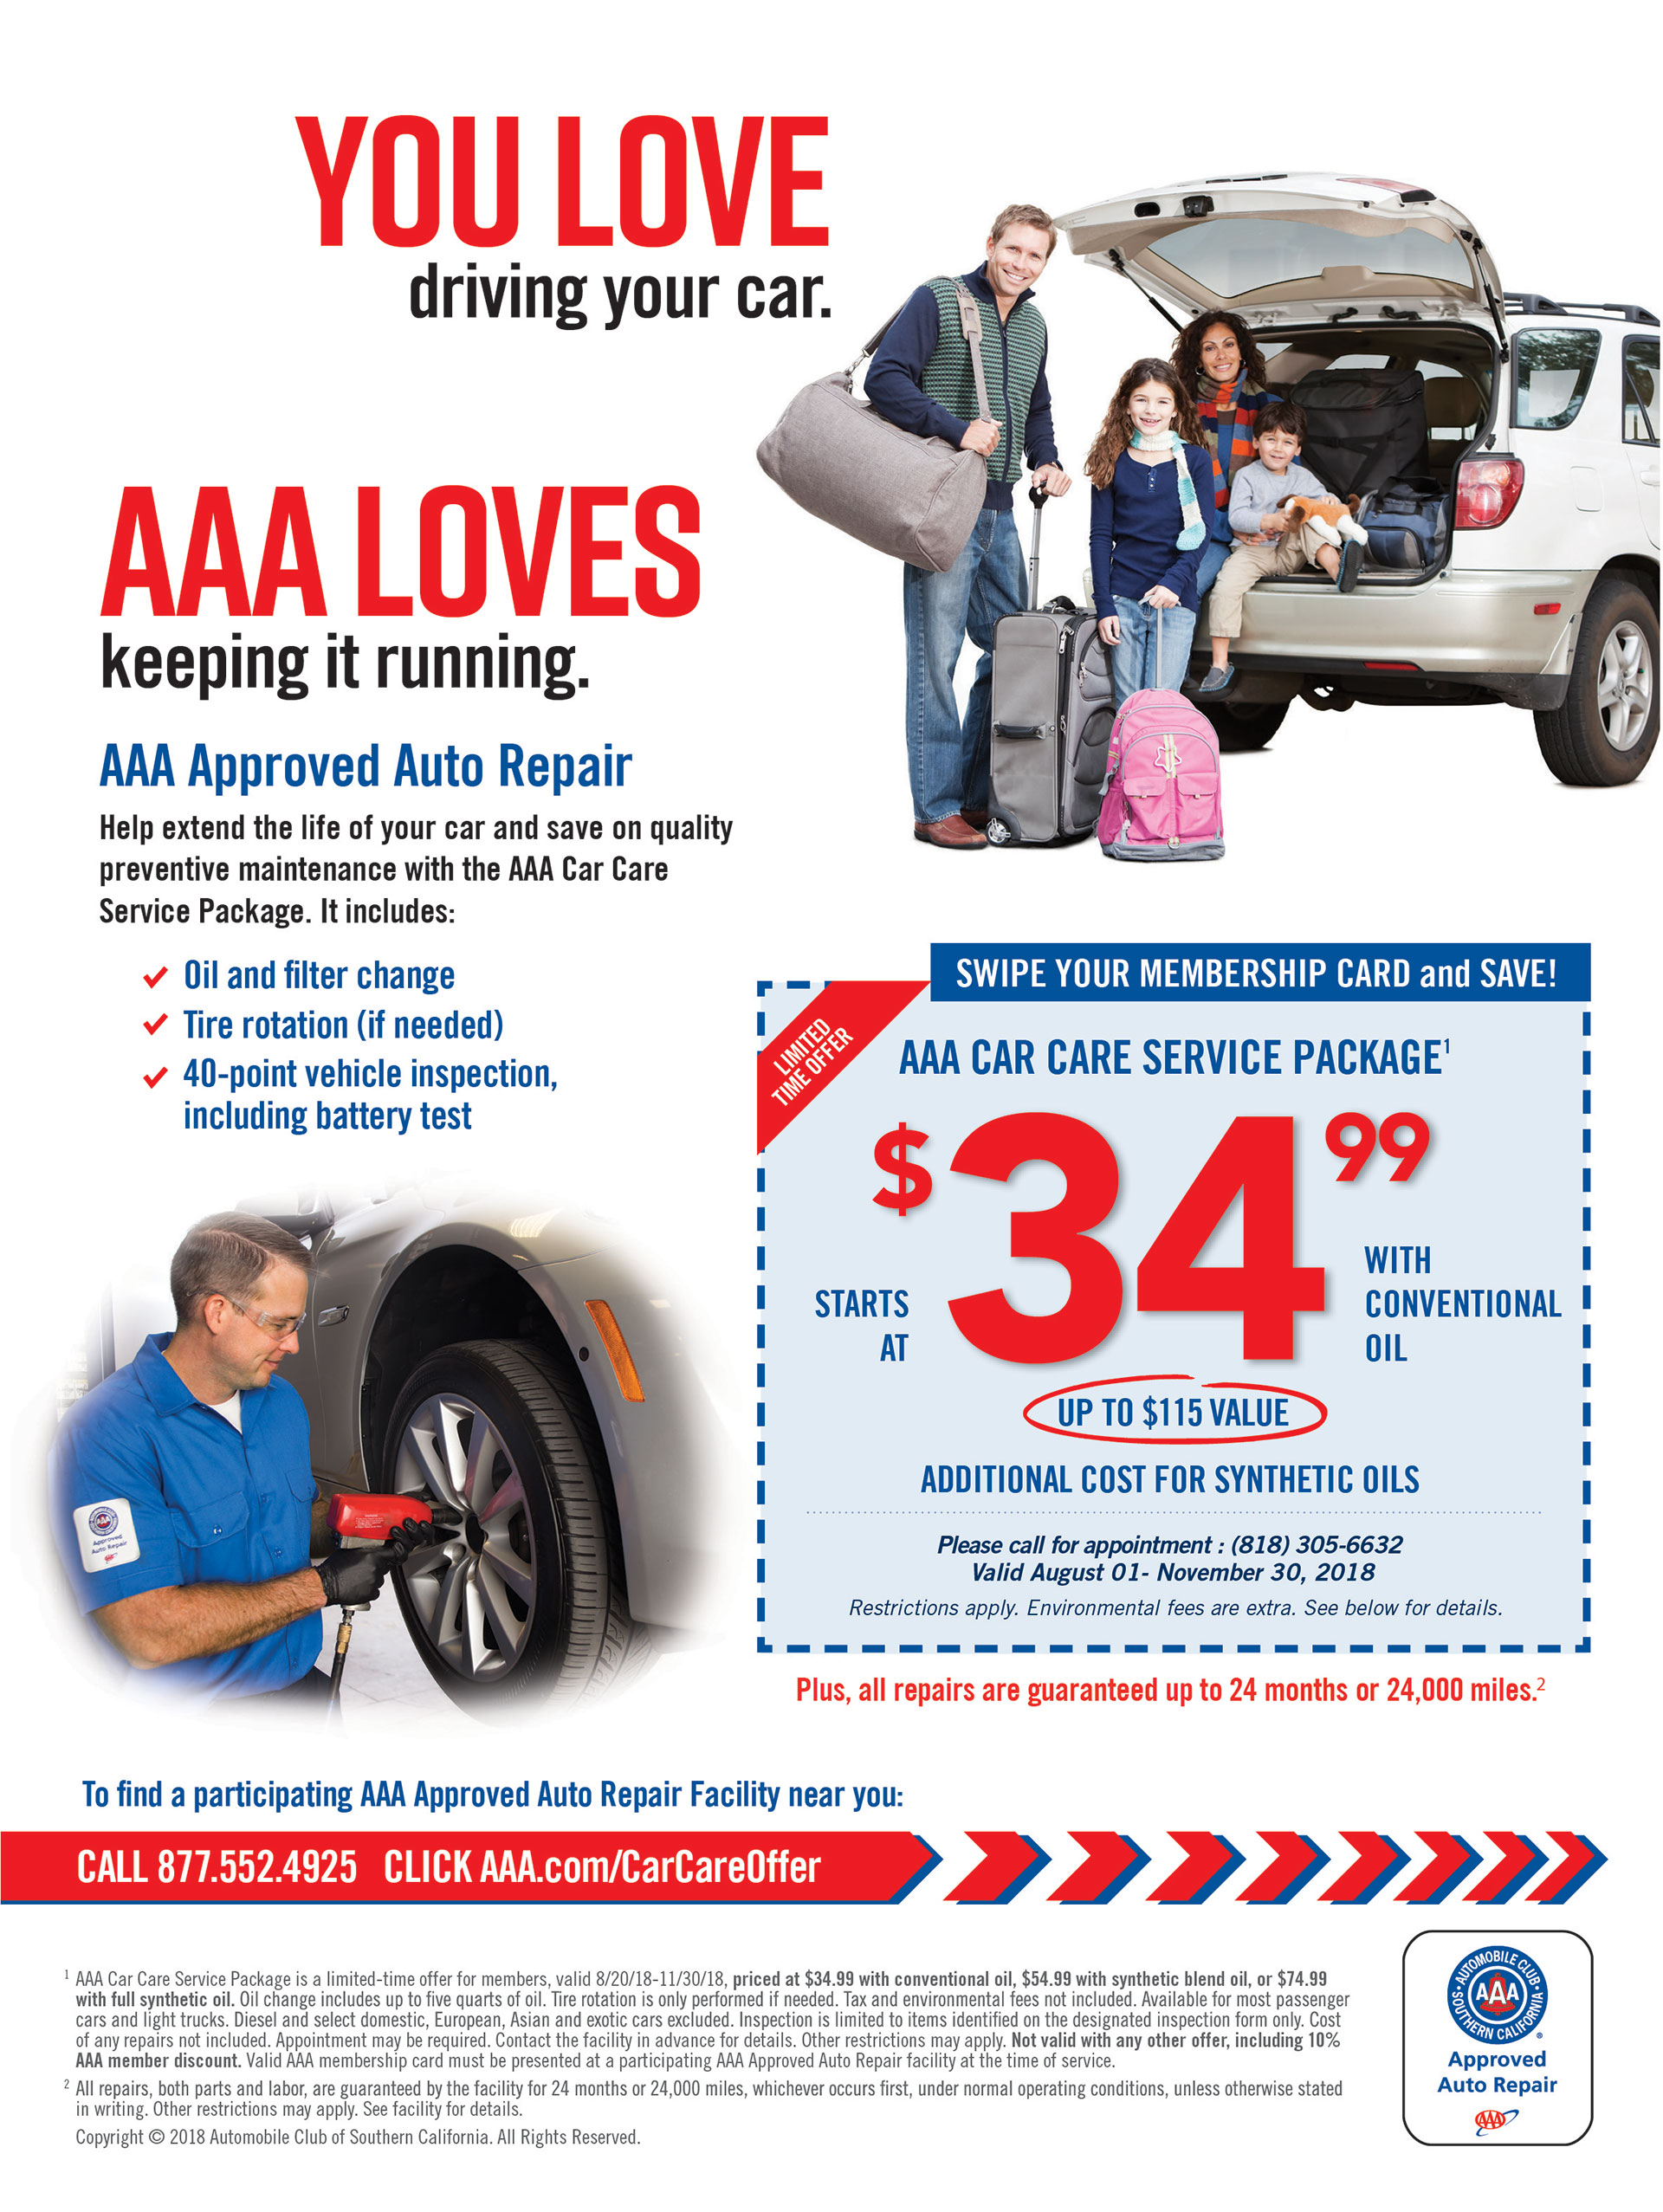 YOU LOVE driving your car. AAA LOVEs keeping it running.